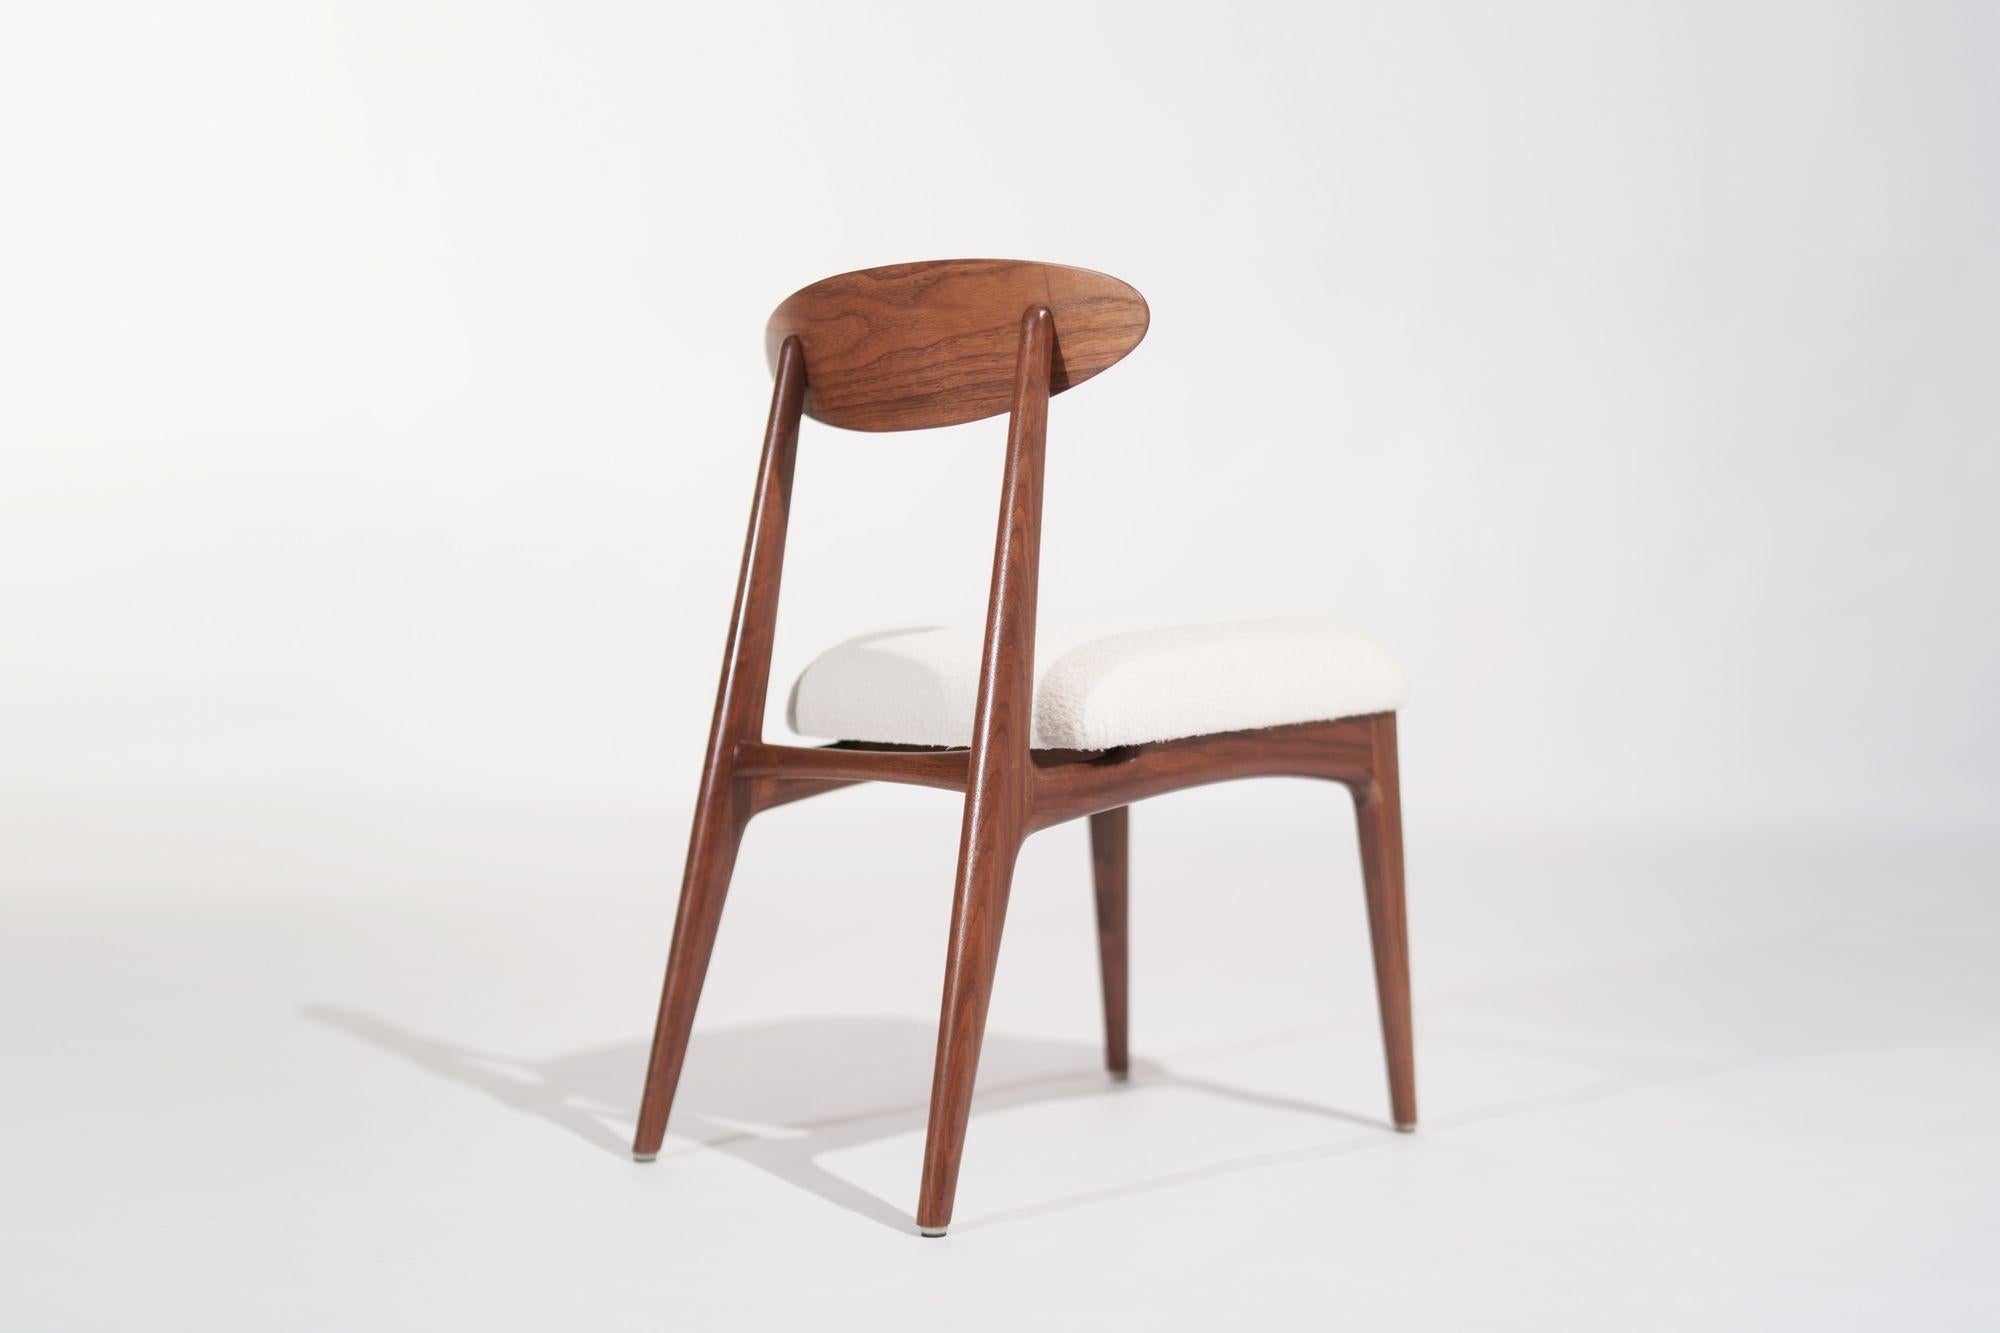 American Sculpted Walnut Desk Chair by C. Stan Morris, C. 1967 For Sale